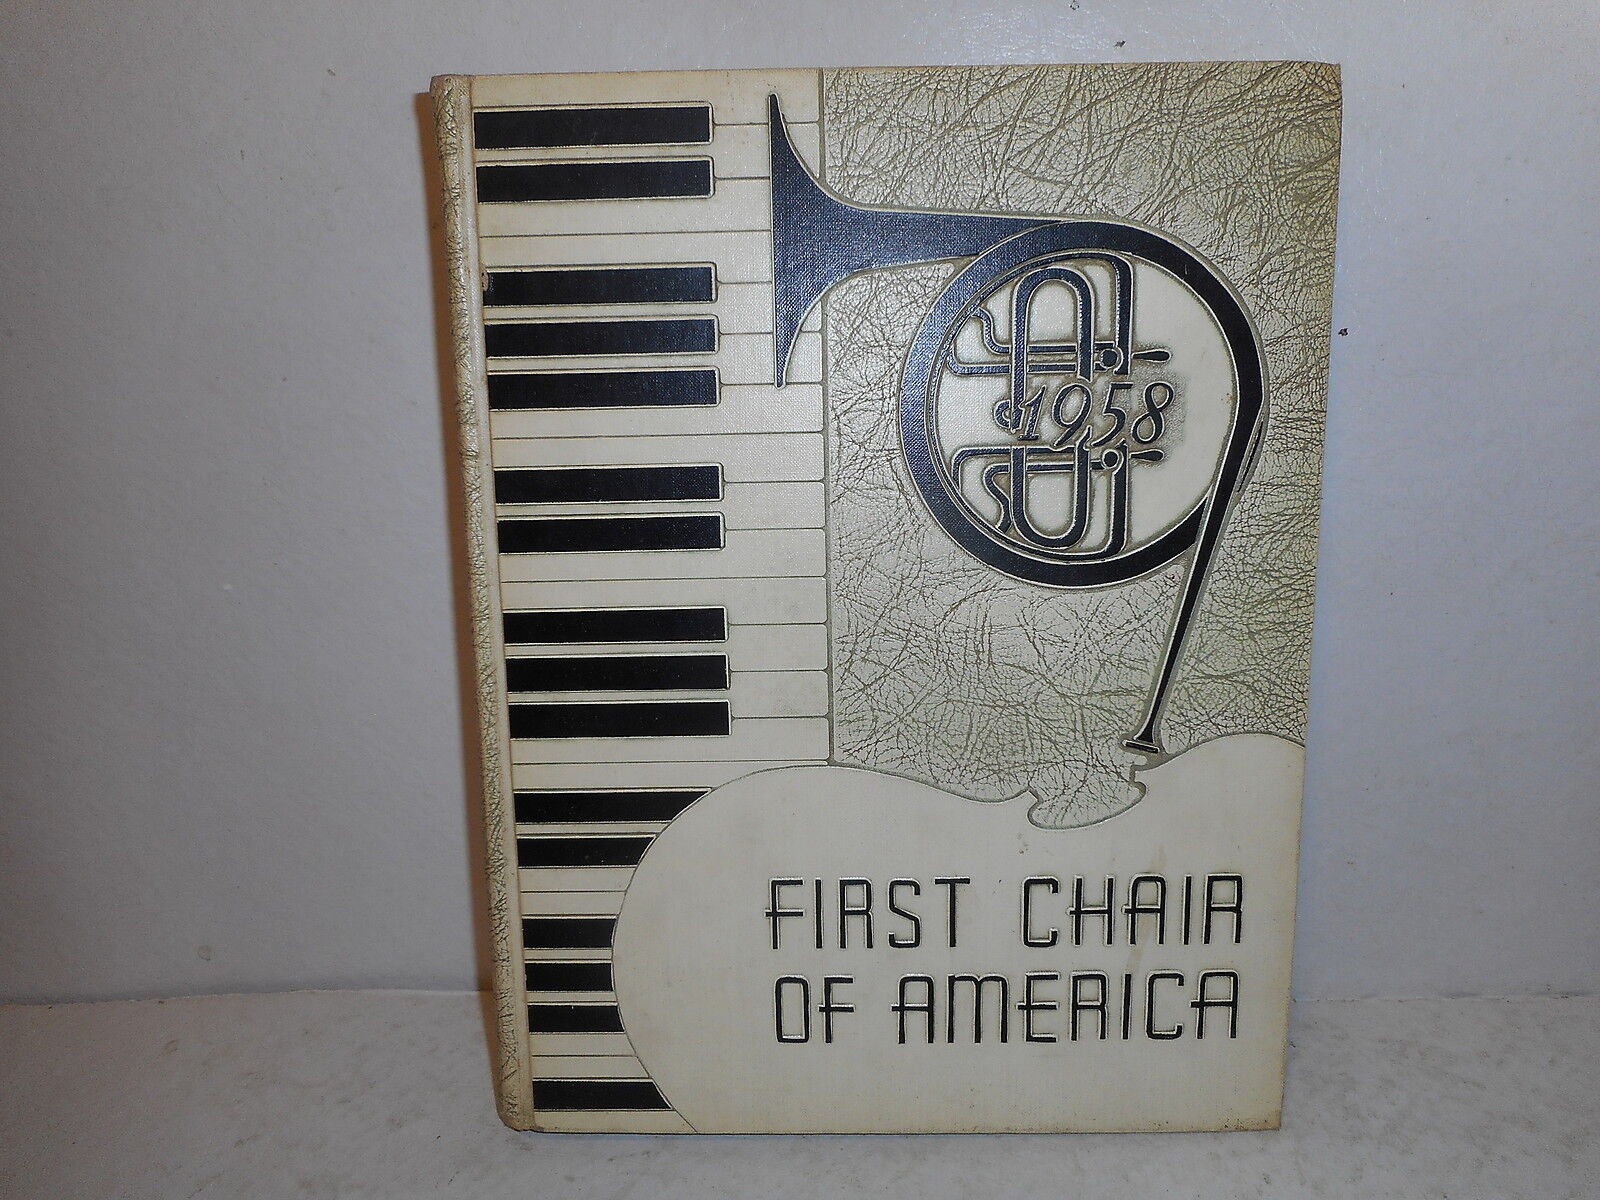 1958 Lockport High School Band Yearbook - First Chair of America -Lockport, Ill.